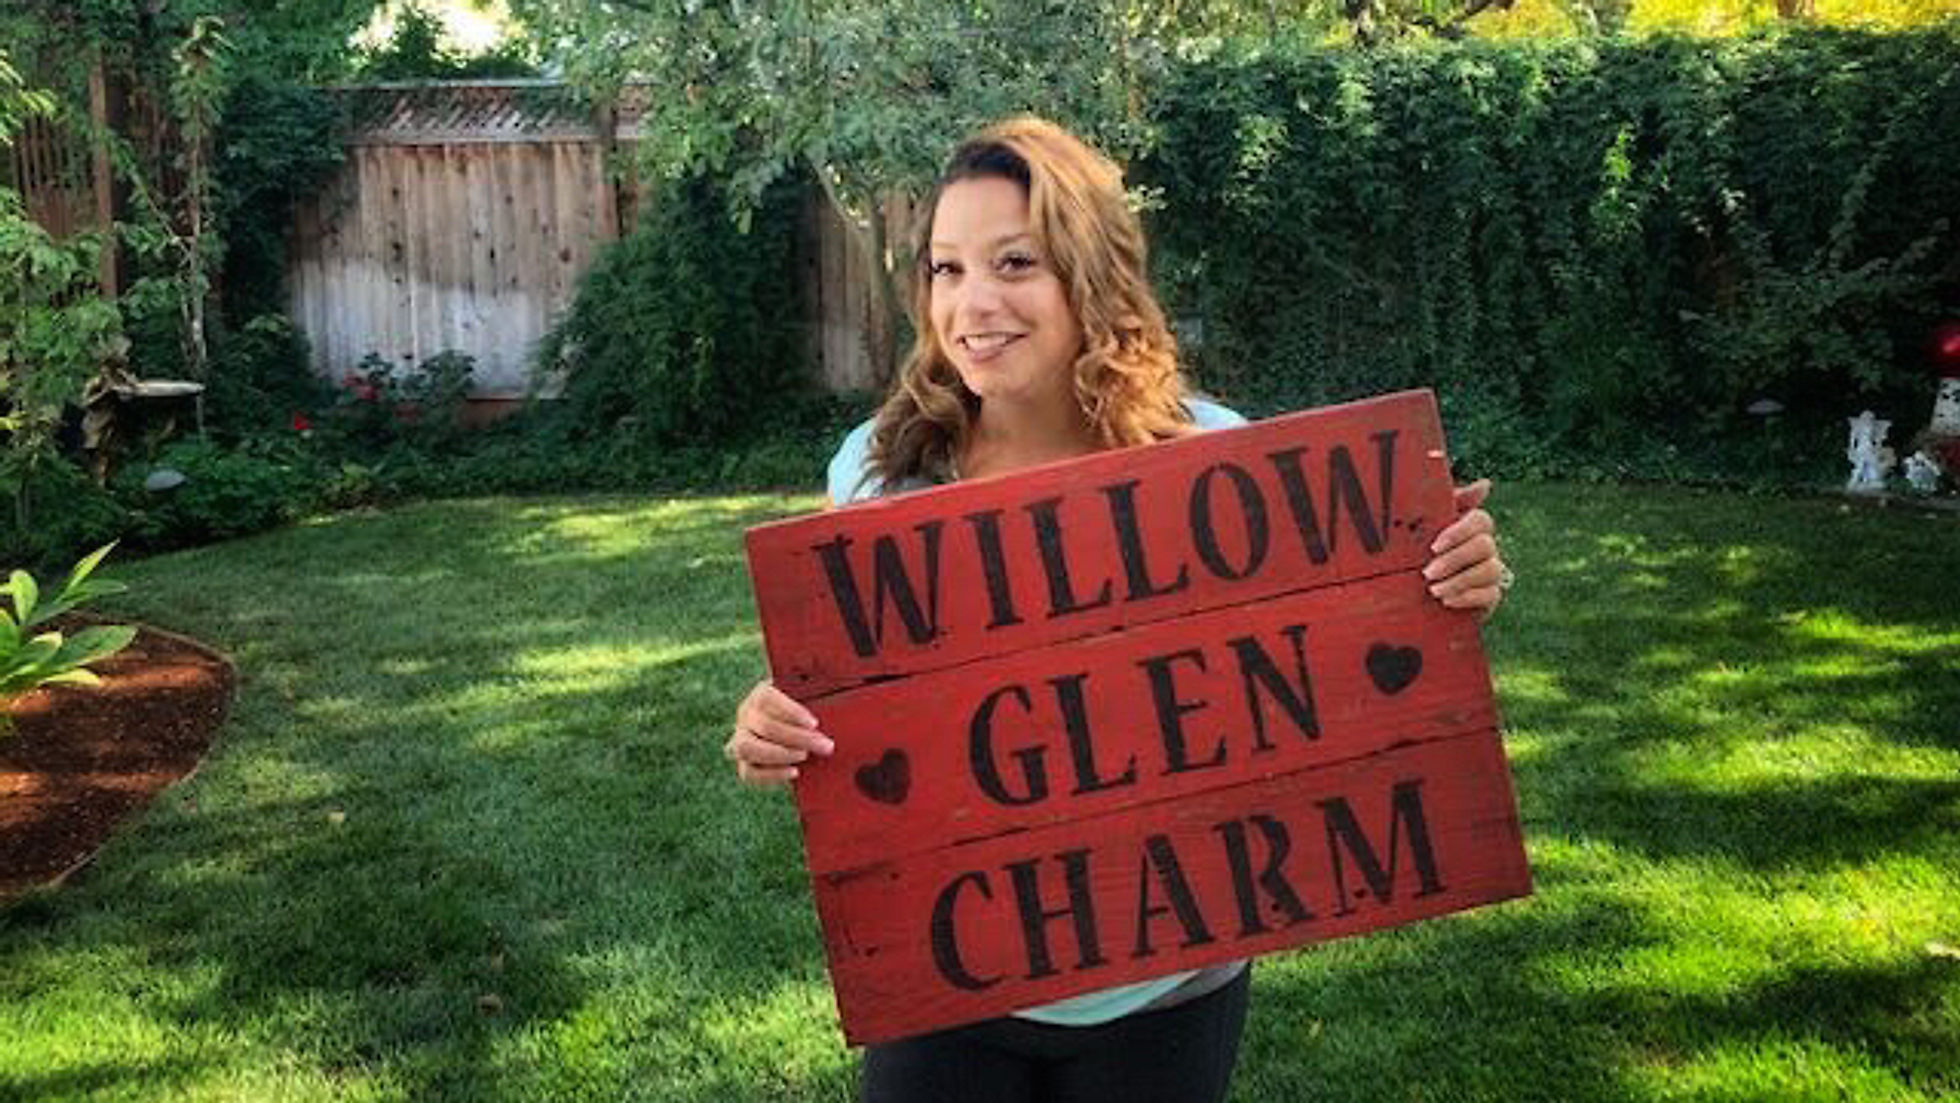 What Makes Willow Glen Charming?